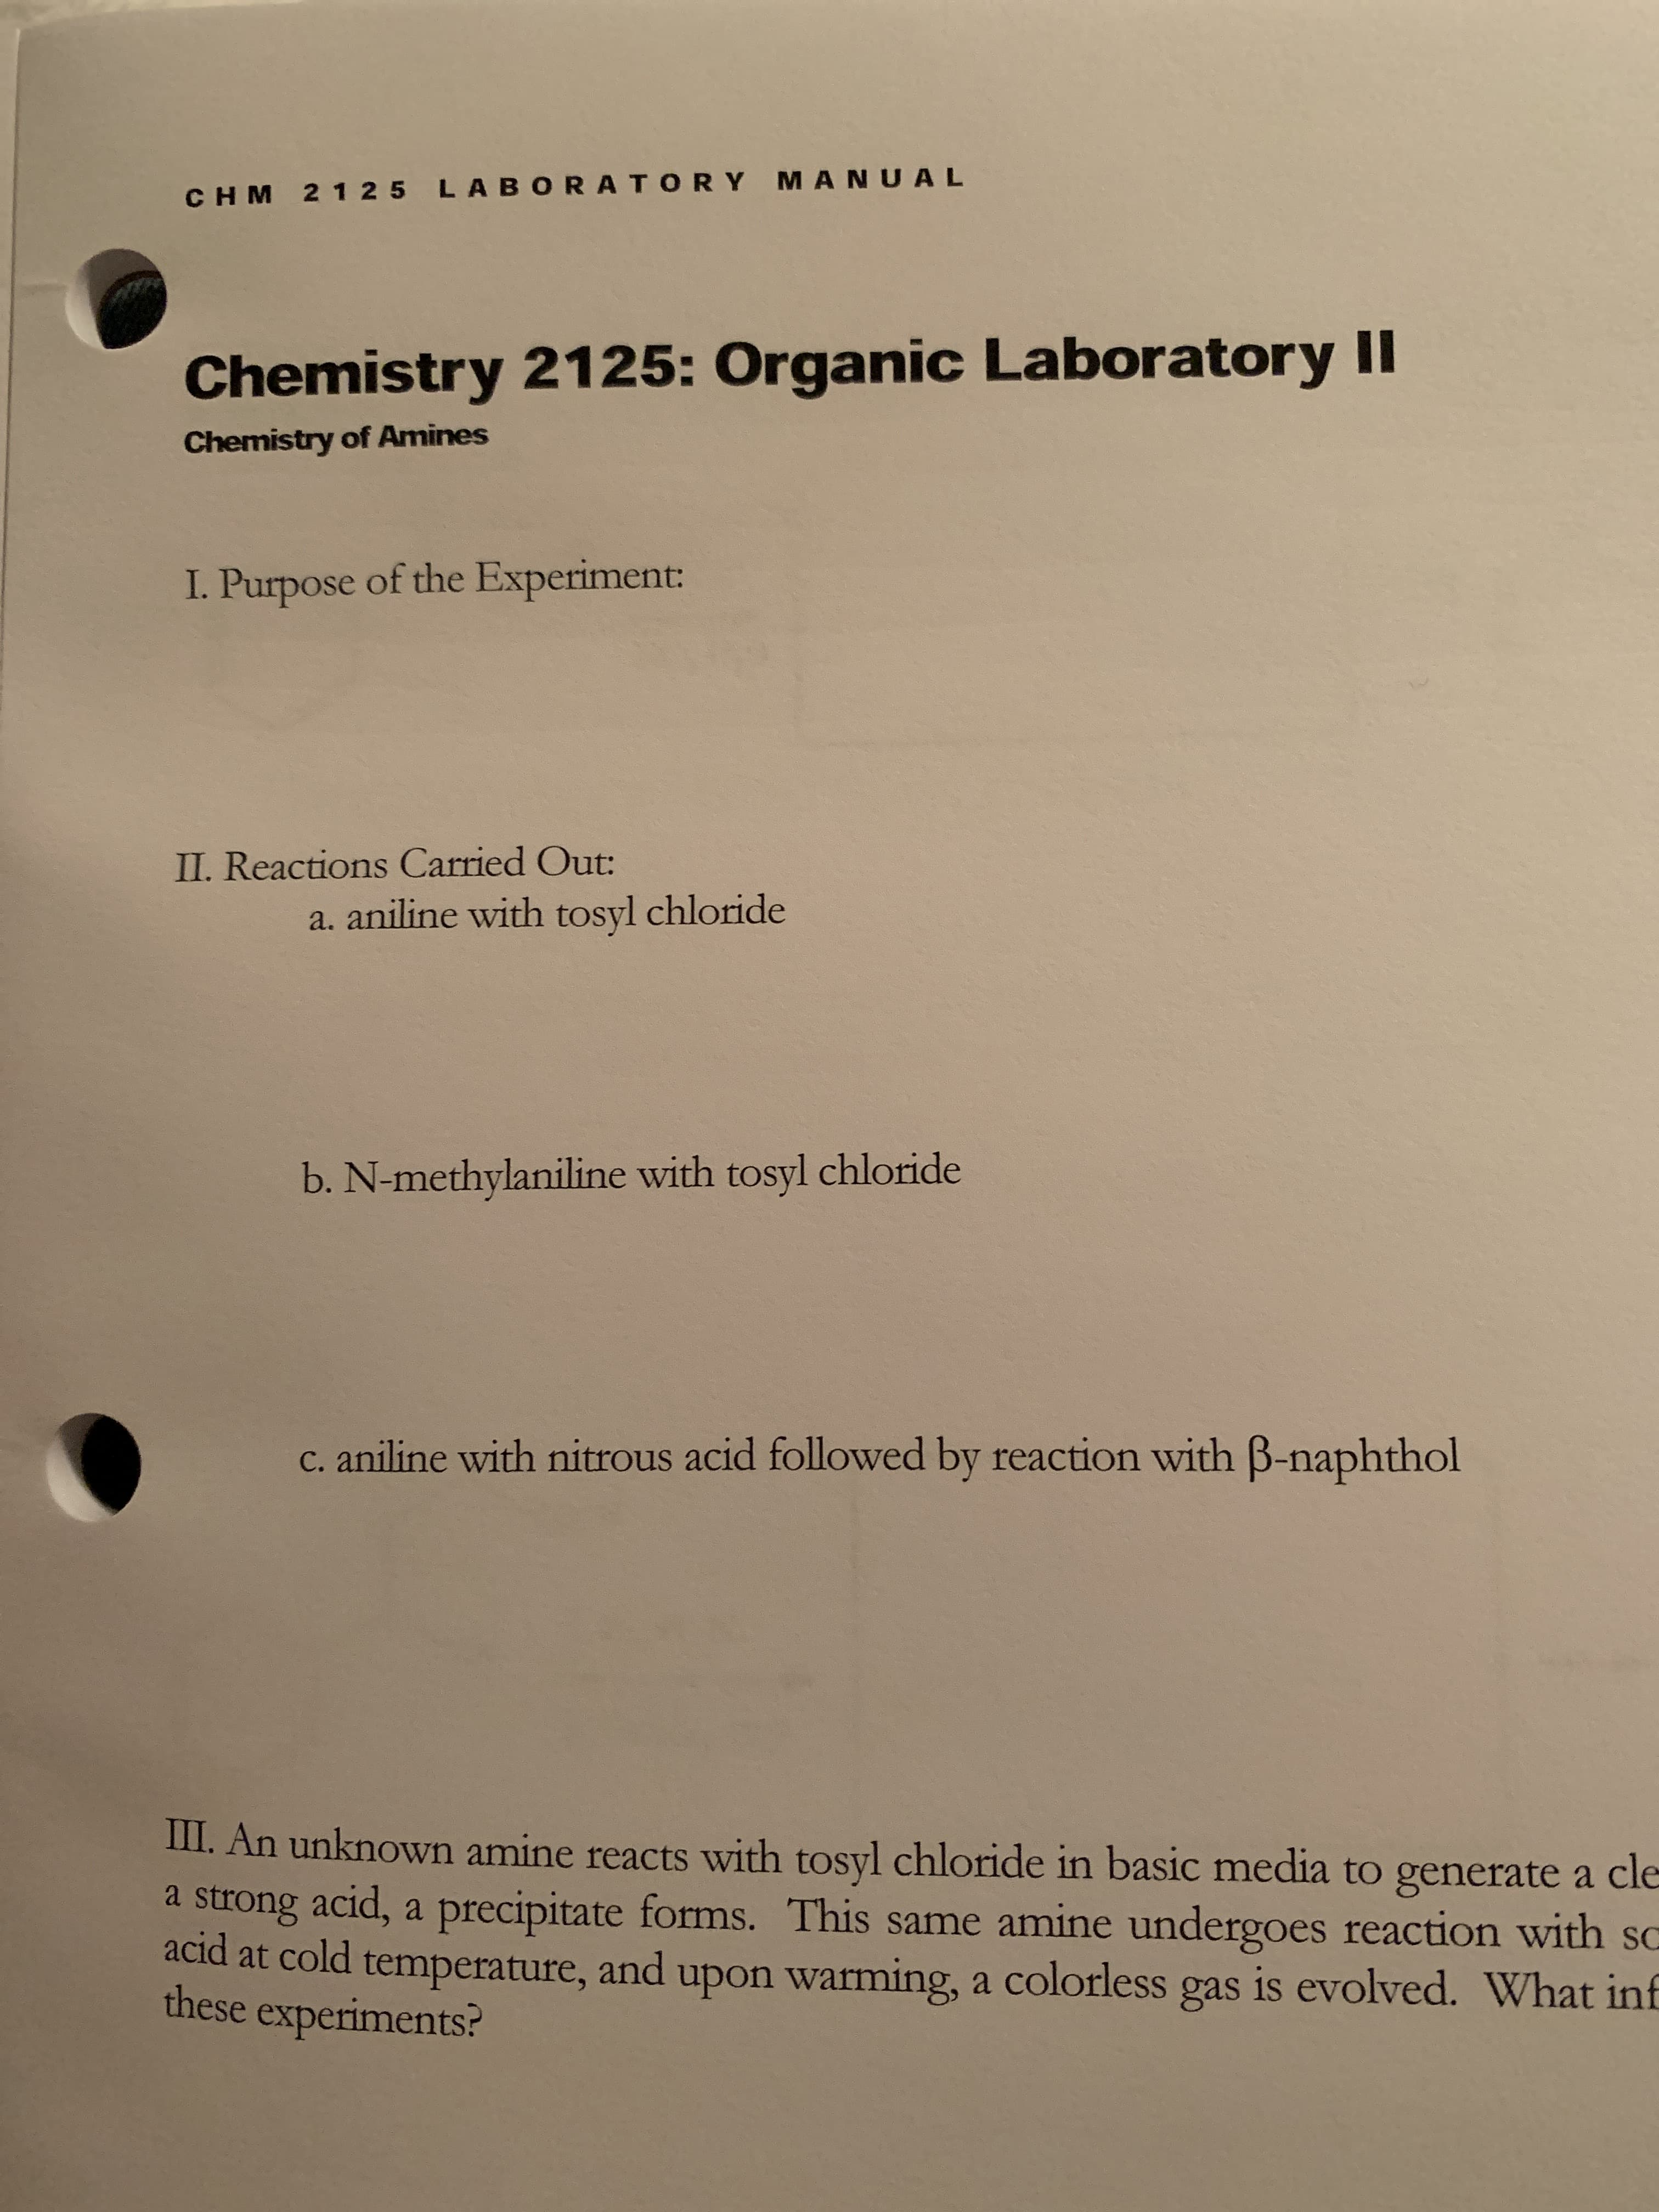 CHM 2 125 LABORATORY MANUAL
Chemistry 2125: Organic Laboratory I
Chemistry of Amines
I. Purpose of the Experiment:
II. Reactions Carried Out:
a. aniline with tosyl chloride
b. N-methylaniline with tosyl chloride
c. aniline with nitrous acid followed by reaction with B-naphthol
III. An unknown amine reacts with tosyl chloride in basic media to generate a cle
a strong acid, a precipitate forms. This same amine undergoes reaction with so
acid at cold temperature, and upon warming, a colorless gas is evolved. What inf
these experiments?
